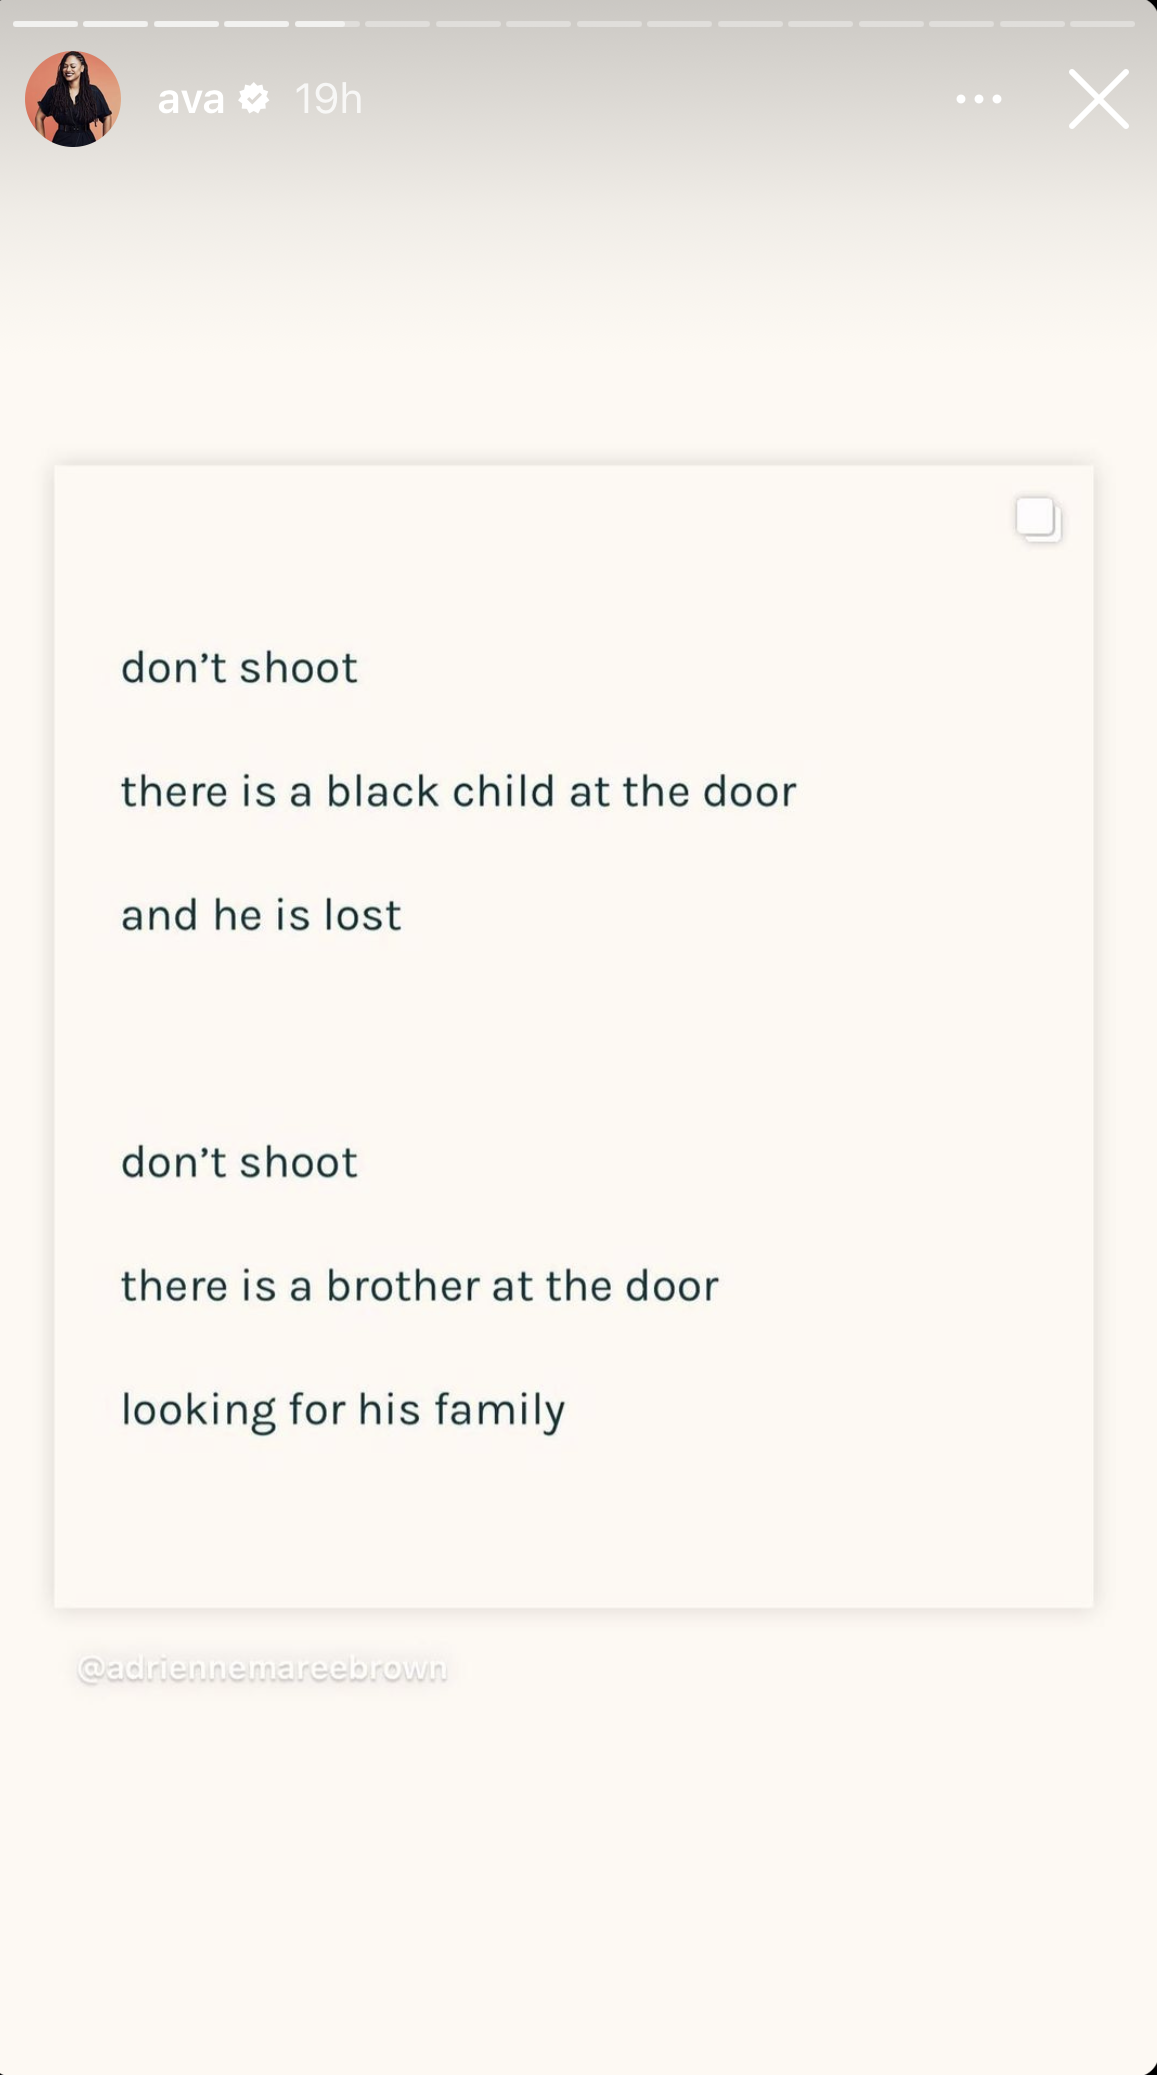 The poem reads &quot;don&#x27;t shoot/ there is a black child at the door/ and he is lost/ don&#x27;t shoot/ there is a brother at the door/ looking for his family